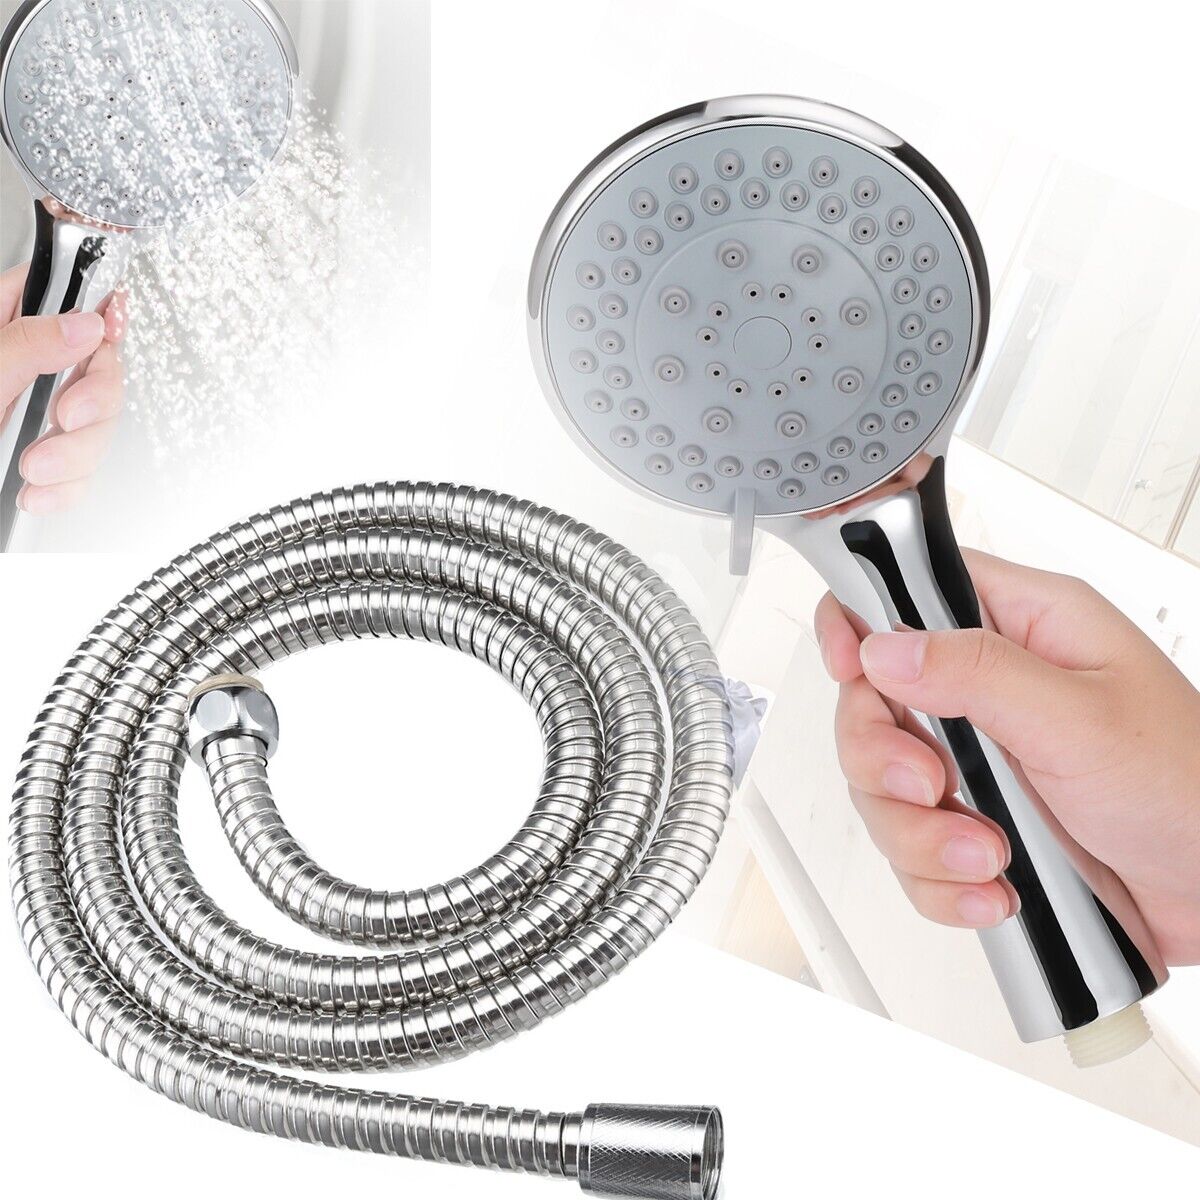 High Pressure Shower Head 5 Settings Handheld Shower heads Spray With 5 FT Hose